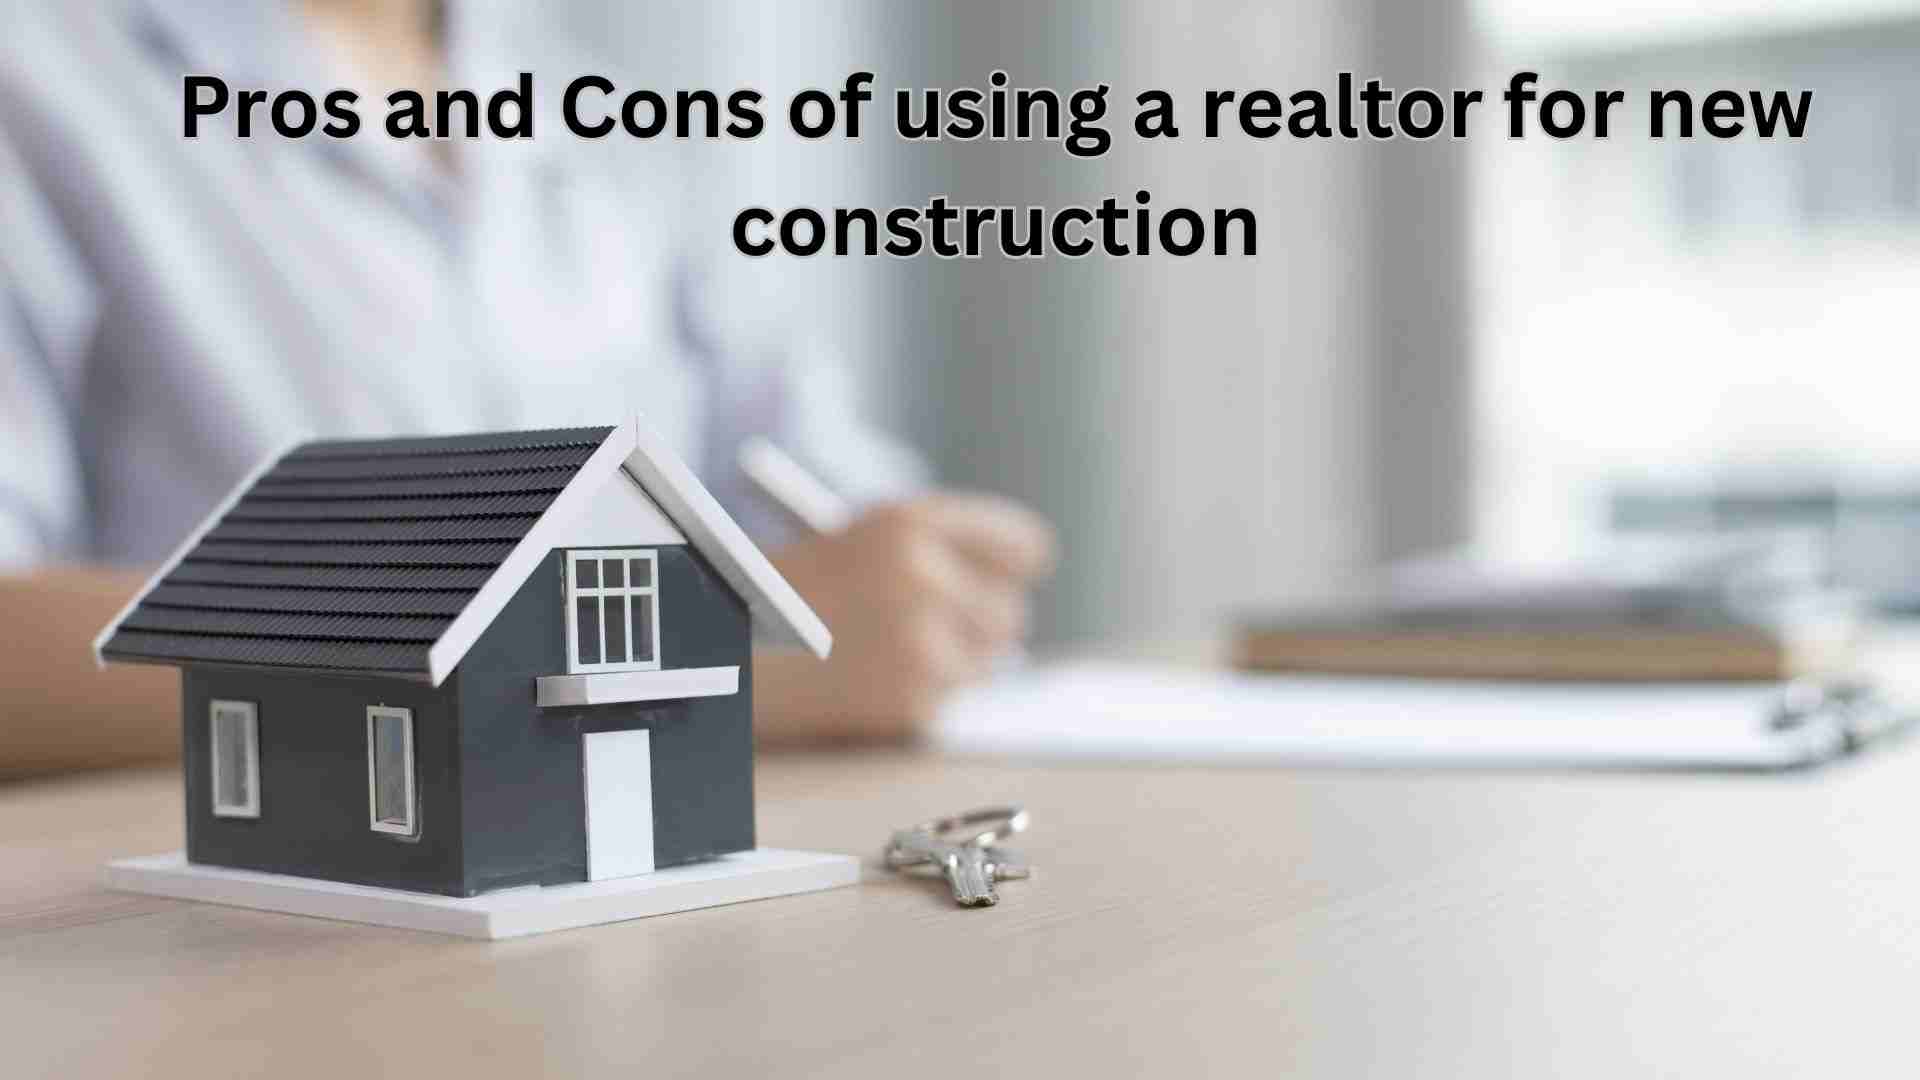 Pros and Cons of using a realtor for new construction